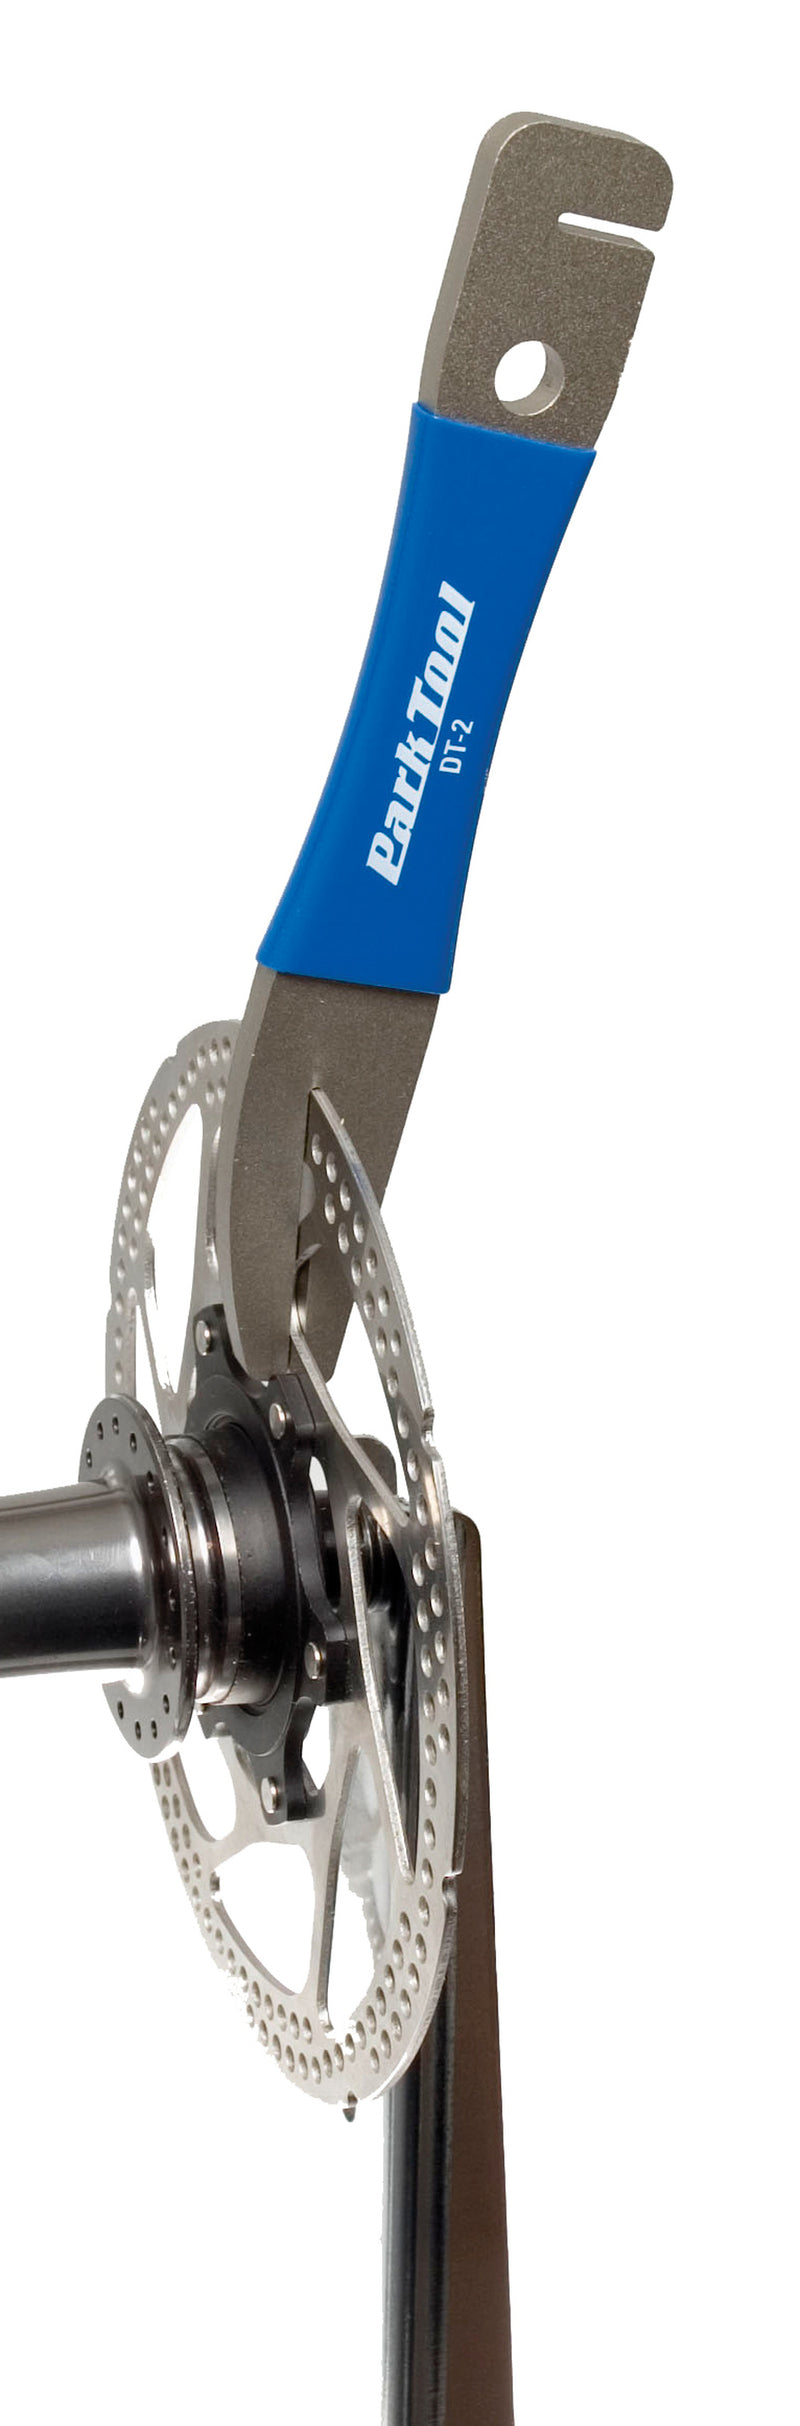 Load image into Gallery viewer, Park Tool DT-2 Rotor Truing Fork - RACKTRENDZ
